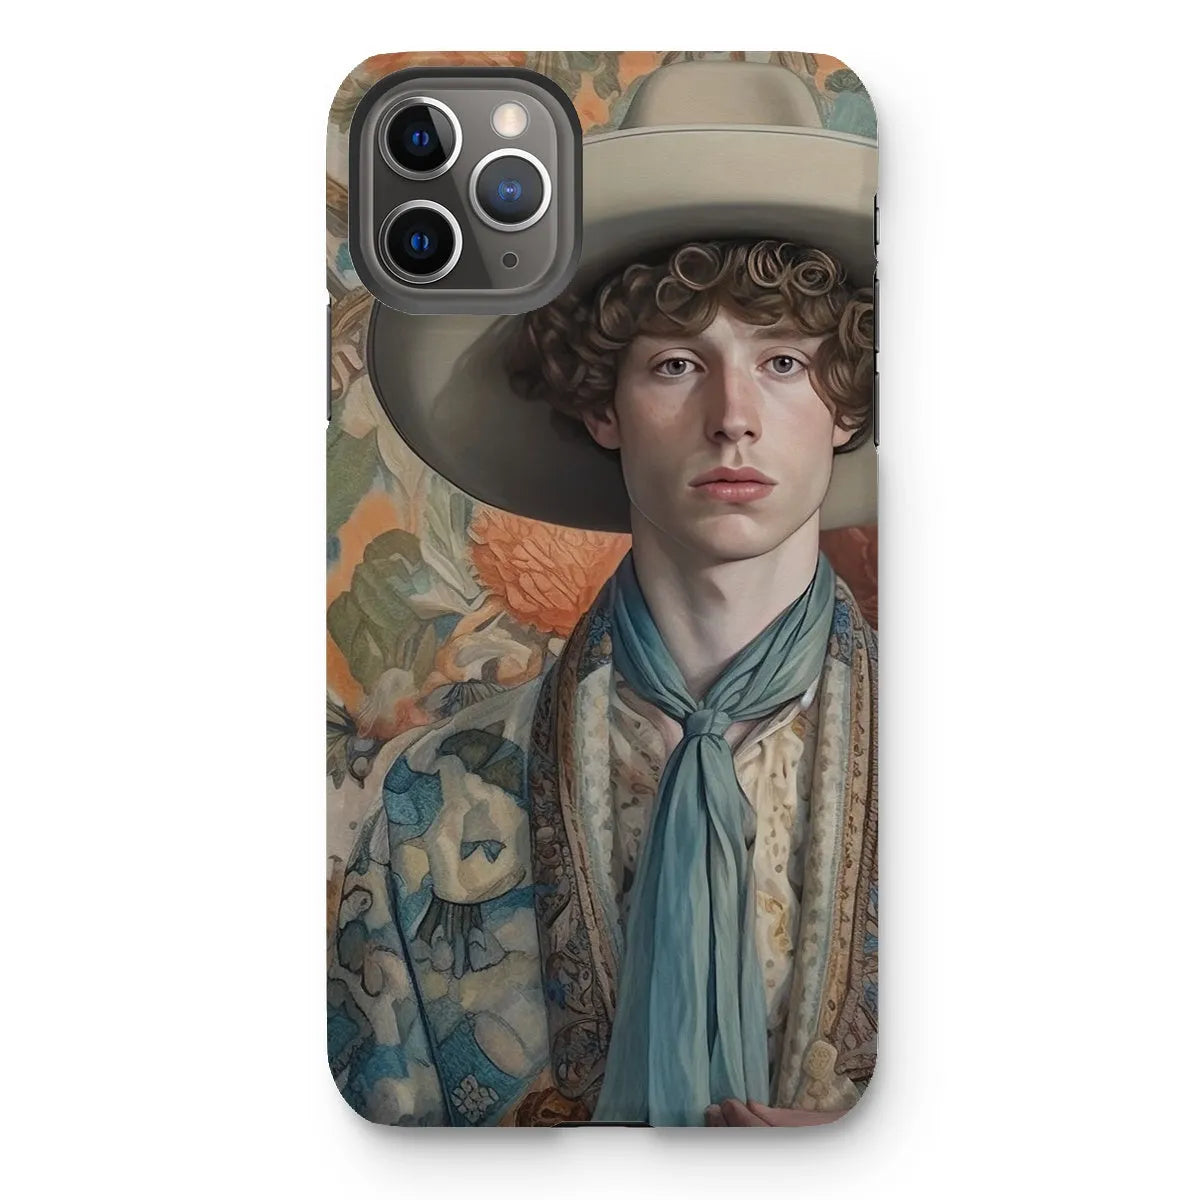 Theodore The Gay Cowboy - Dandy Gay Men Art Phone Case - Iphone 11 Pro Max / Matte - Mobile Phone Cases - Aesthetic Art